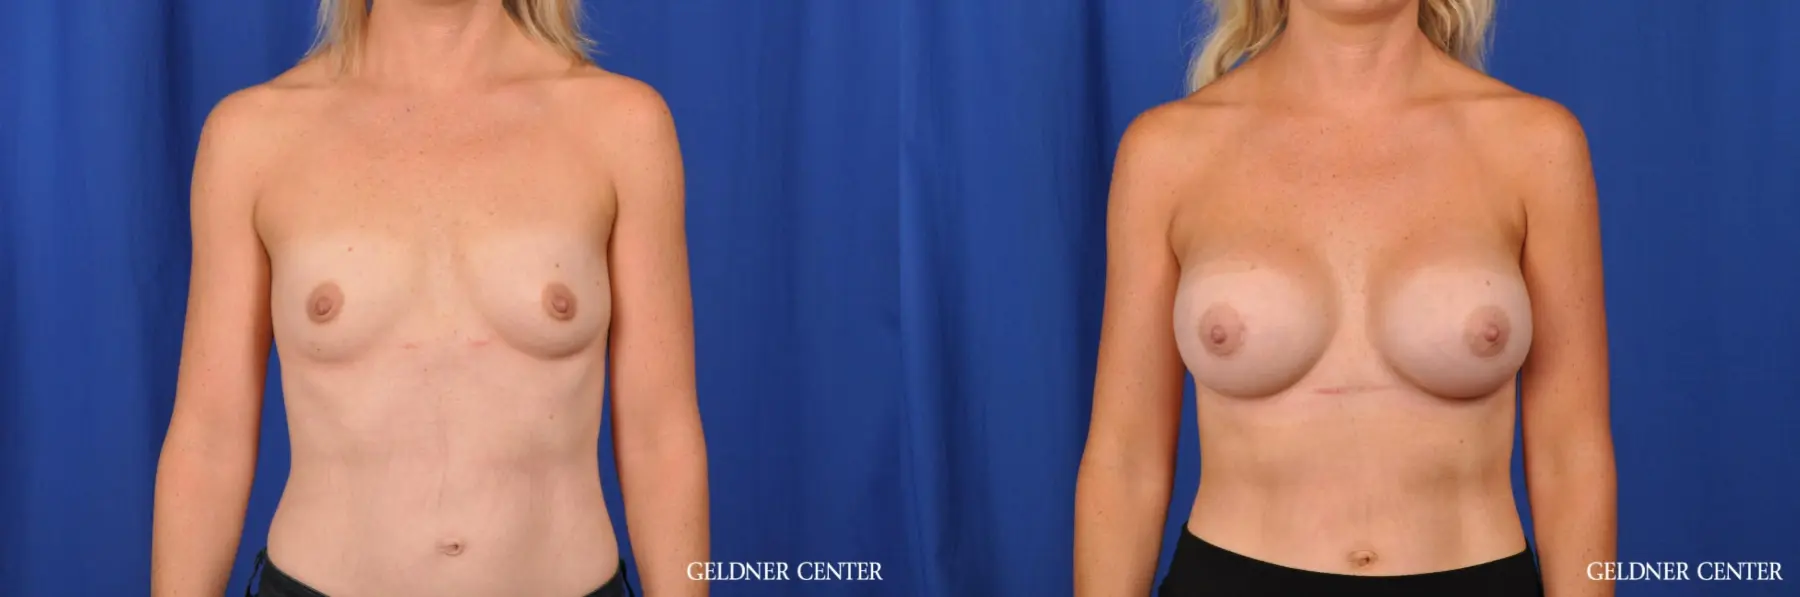 Chicago Breast Augmentation: Patient 1 - Before and After 1